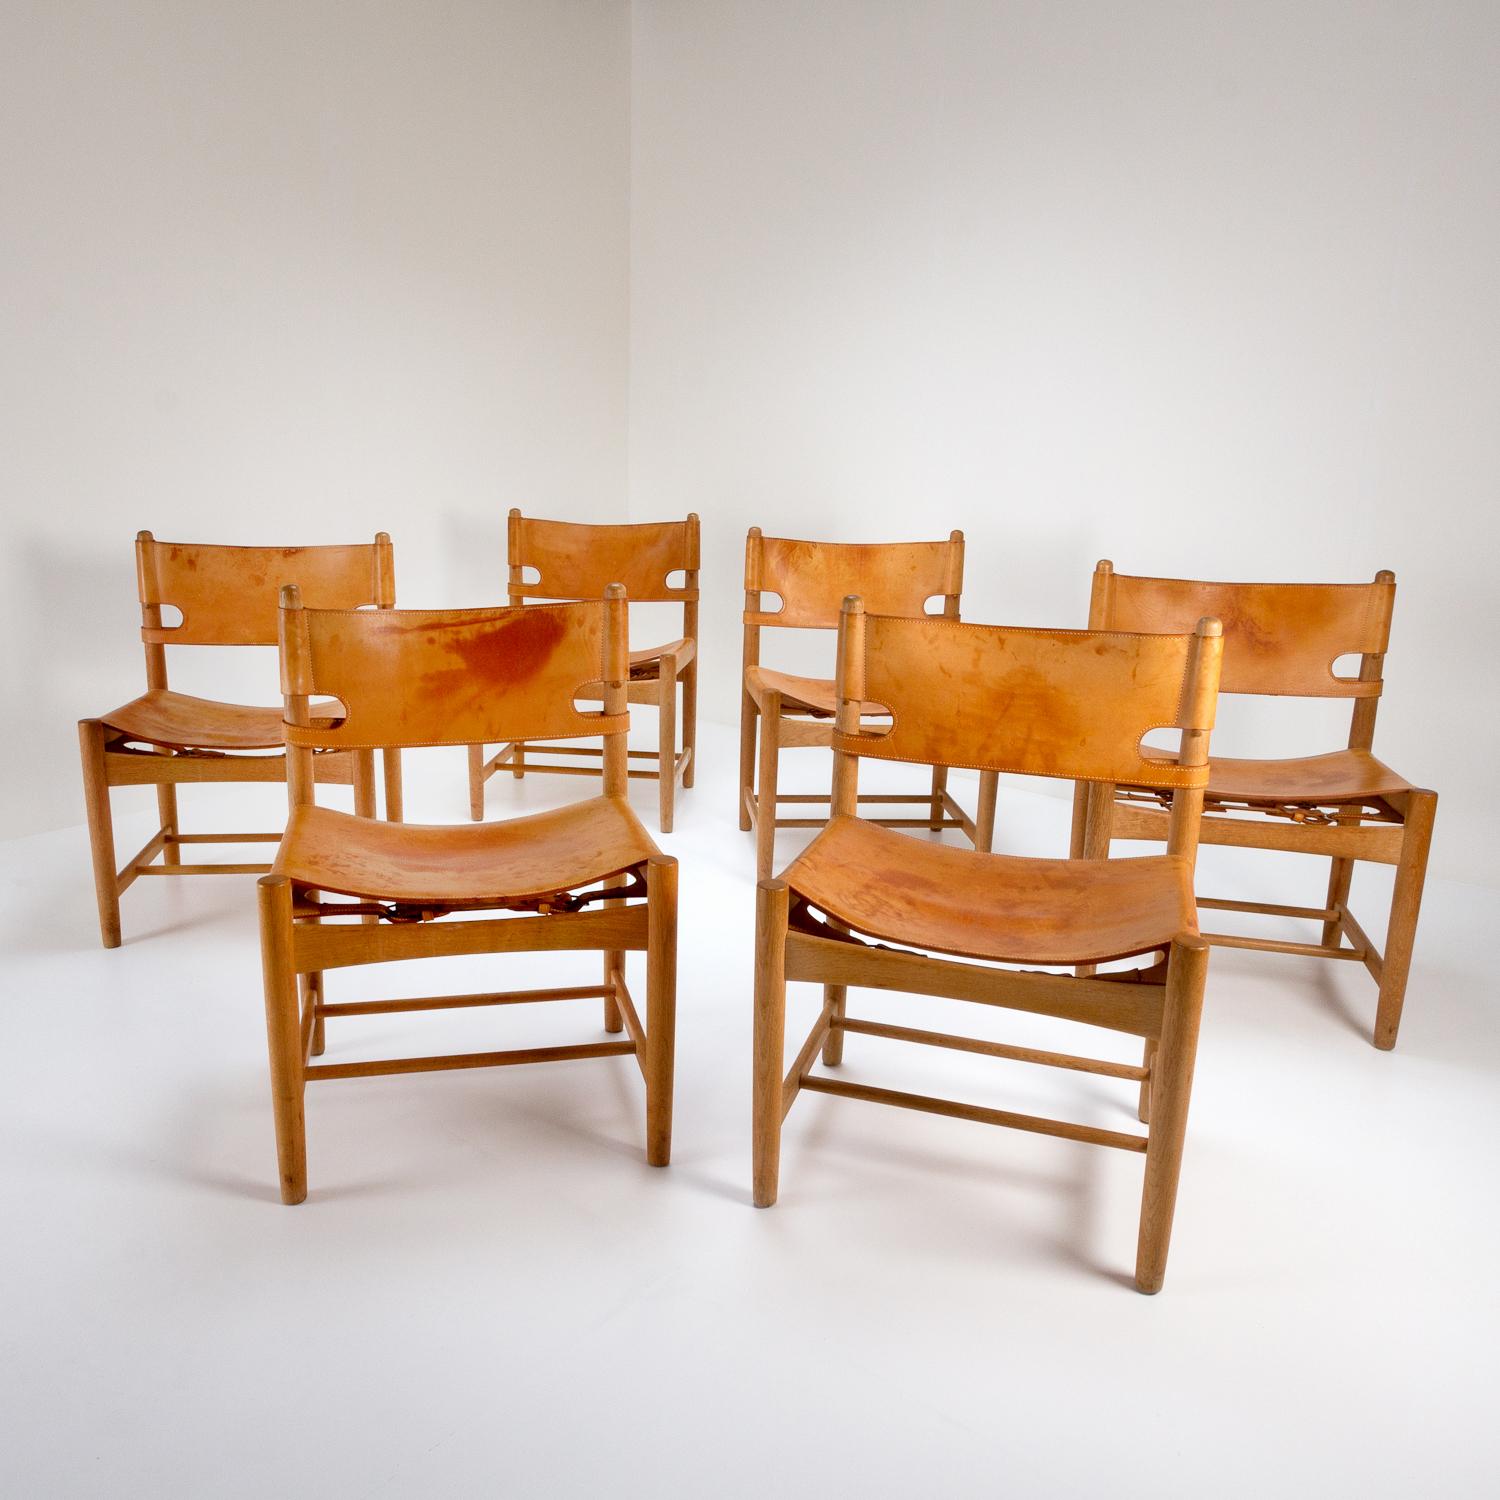 A set of six BM 3237 solid oak and cognac leather hunter dining chairs by Børge Mogensen for Fredericia, Denmark, 1960s.